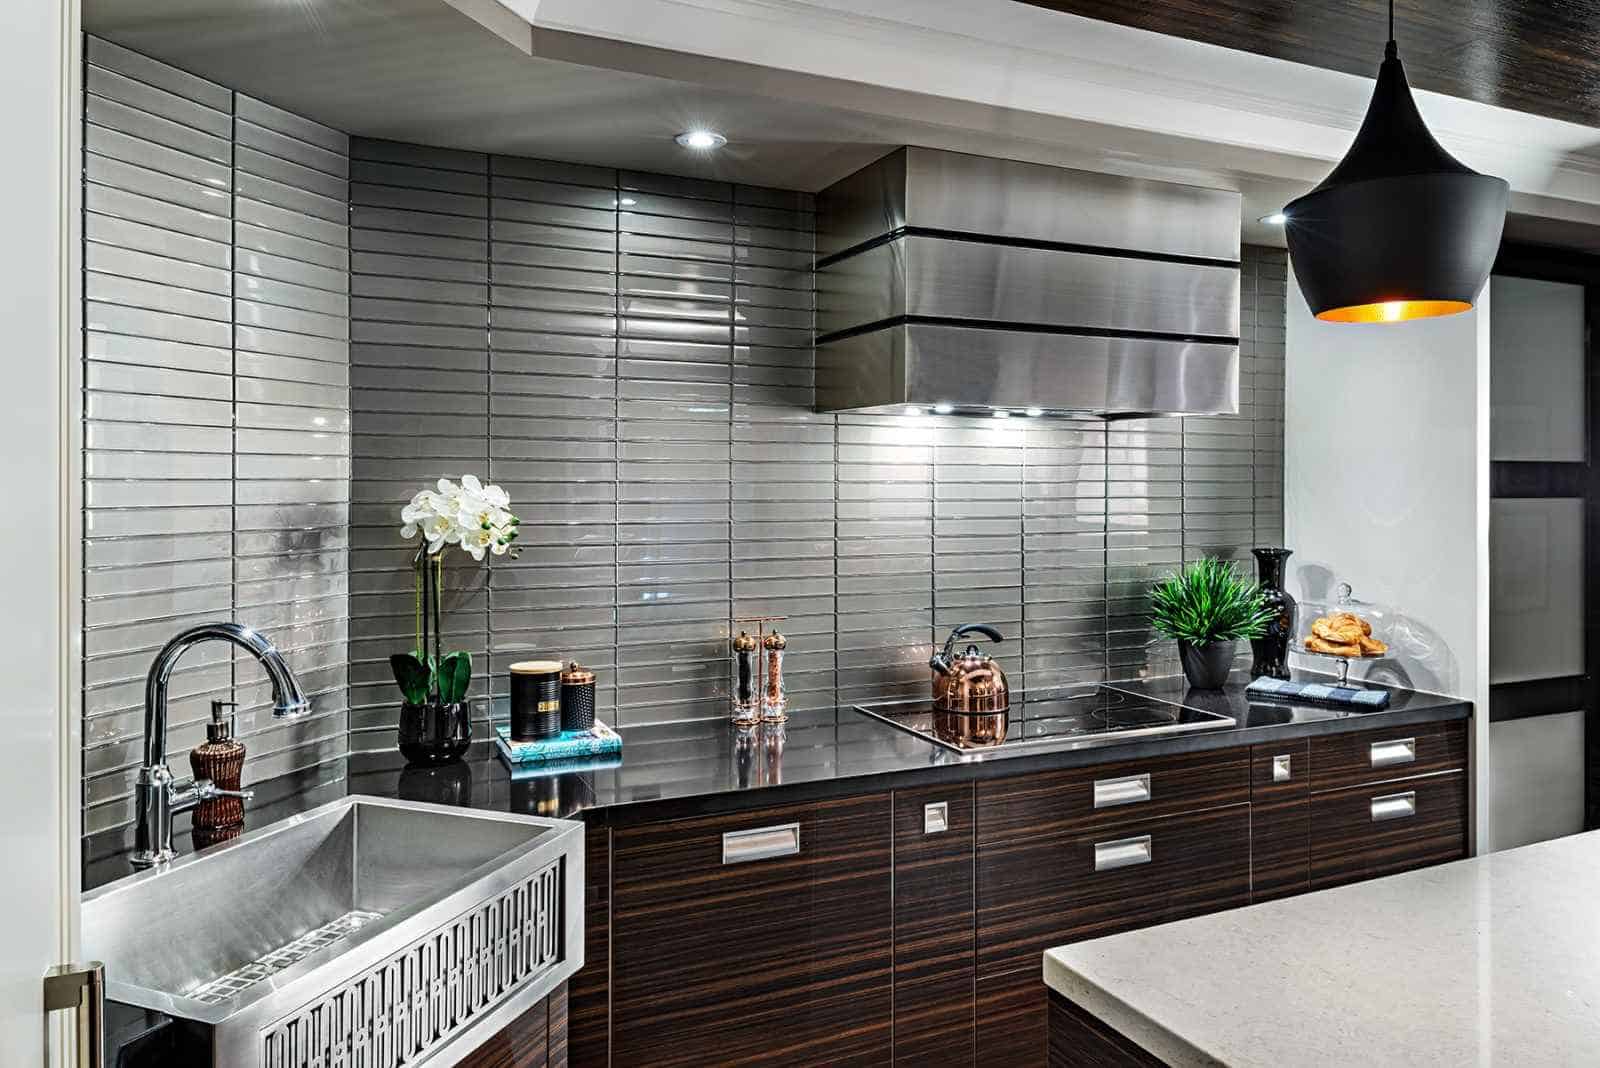 metallic finish silver themed kitchen with brown cabinets and black ceiling lights